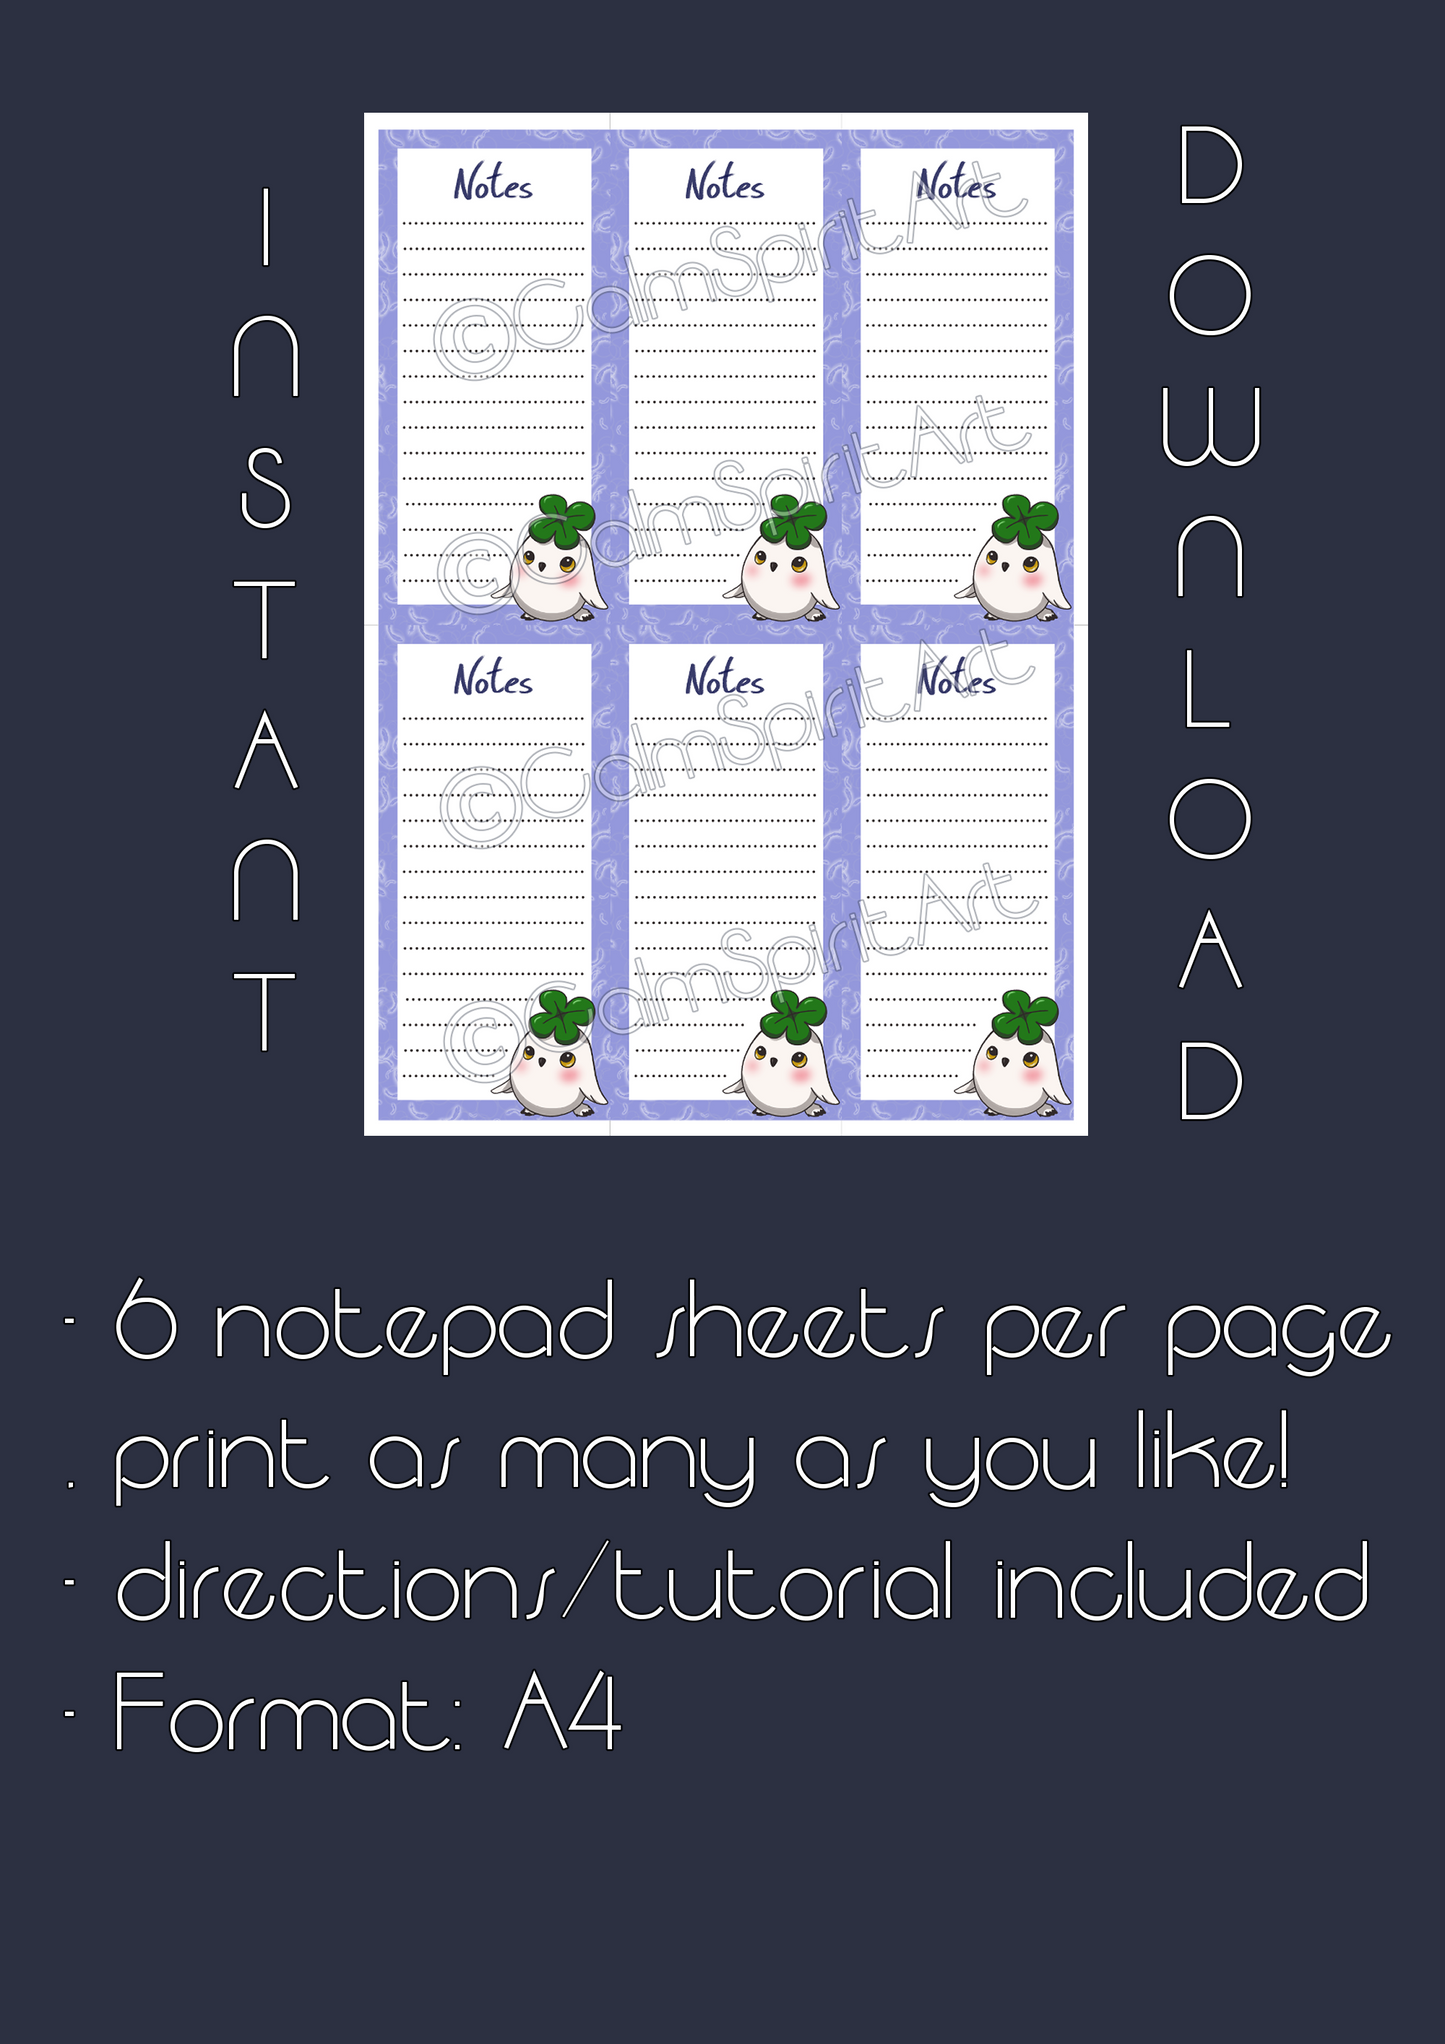 Instant download: Notepad design 2-pack "Timmi & Grumpy" incl. tutorial